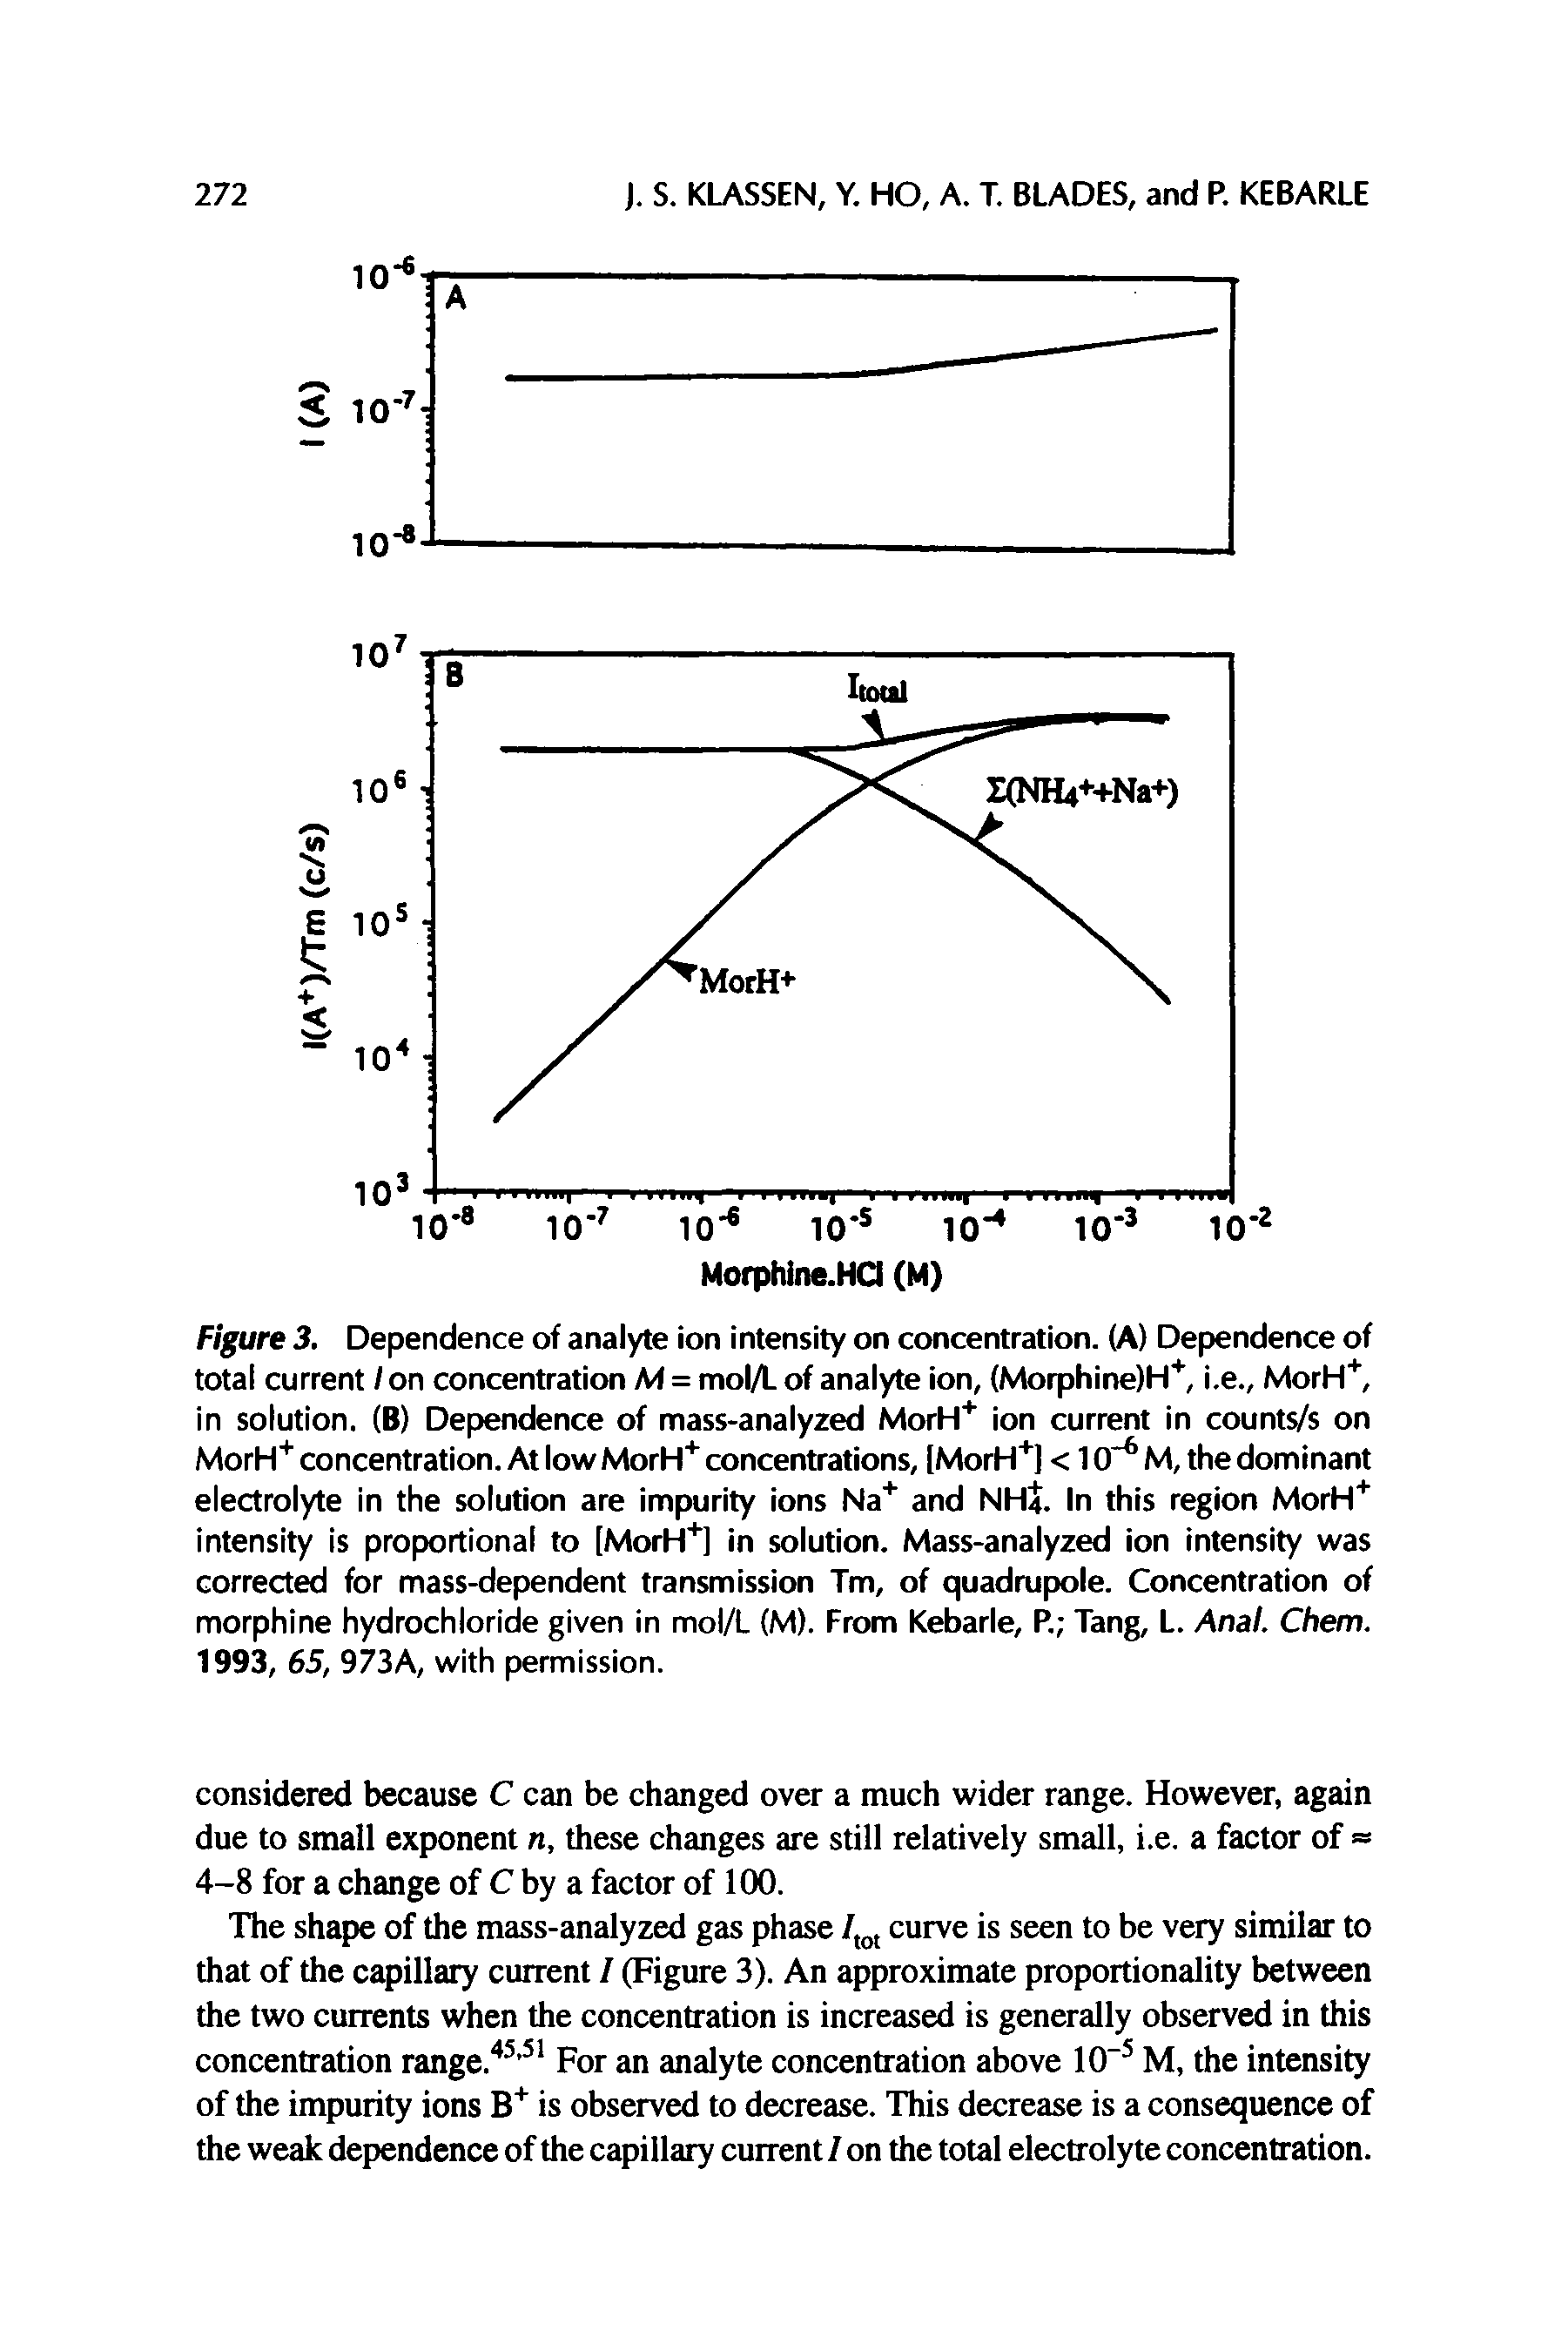 Figure 3. Dependence of analyte ion intensity on concentration. (A) Dependence of total current / on concentration M = mol/L of analyte ion, (Morphine)H+, i.e., MorH+, in solution. (B) Dependence of mass-analyzed MorH+ ion current in counts/s on MorH+ concentration. At low MorH+ concentrations, [MorH+] < 1CT6 M, the dominant electrolyte in the solution are impurity ions Na+ and NH4. In this region MorH+ intensity is proportional to [MorH+] in solution. Mass-analyzed ion intensity was corrected for mass-dependent transmission Tm, of quadrupole. Concentration of morphine hydrochloride given in mol/L (M). From Kebarle, P. Tang, L. Anal. Chem. 1993, 65, 973A, with permission.